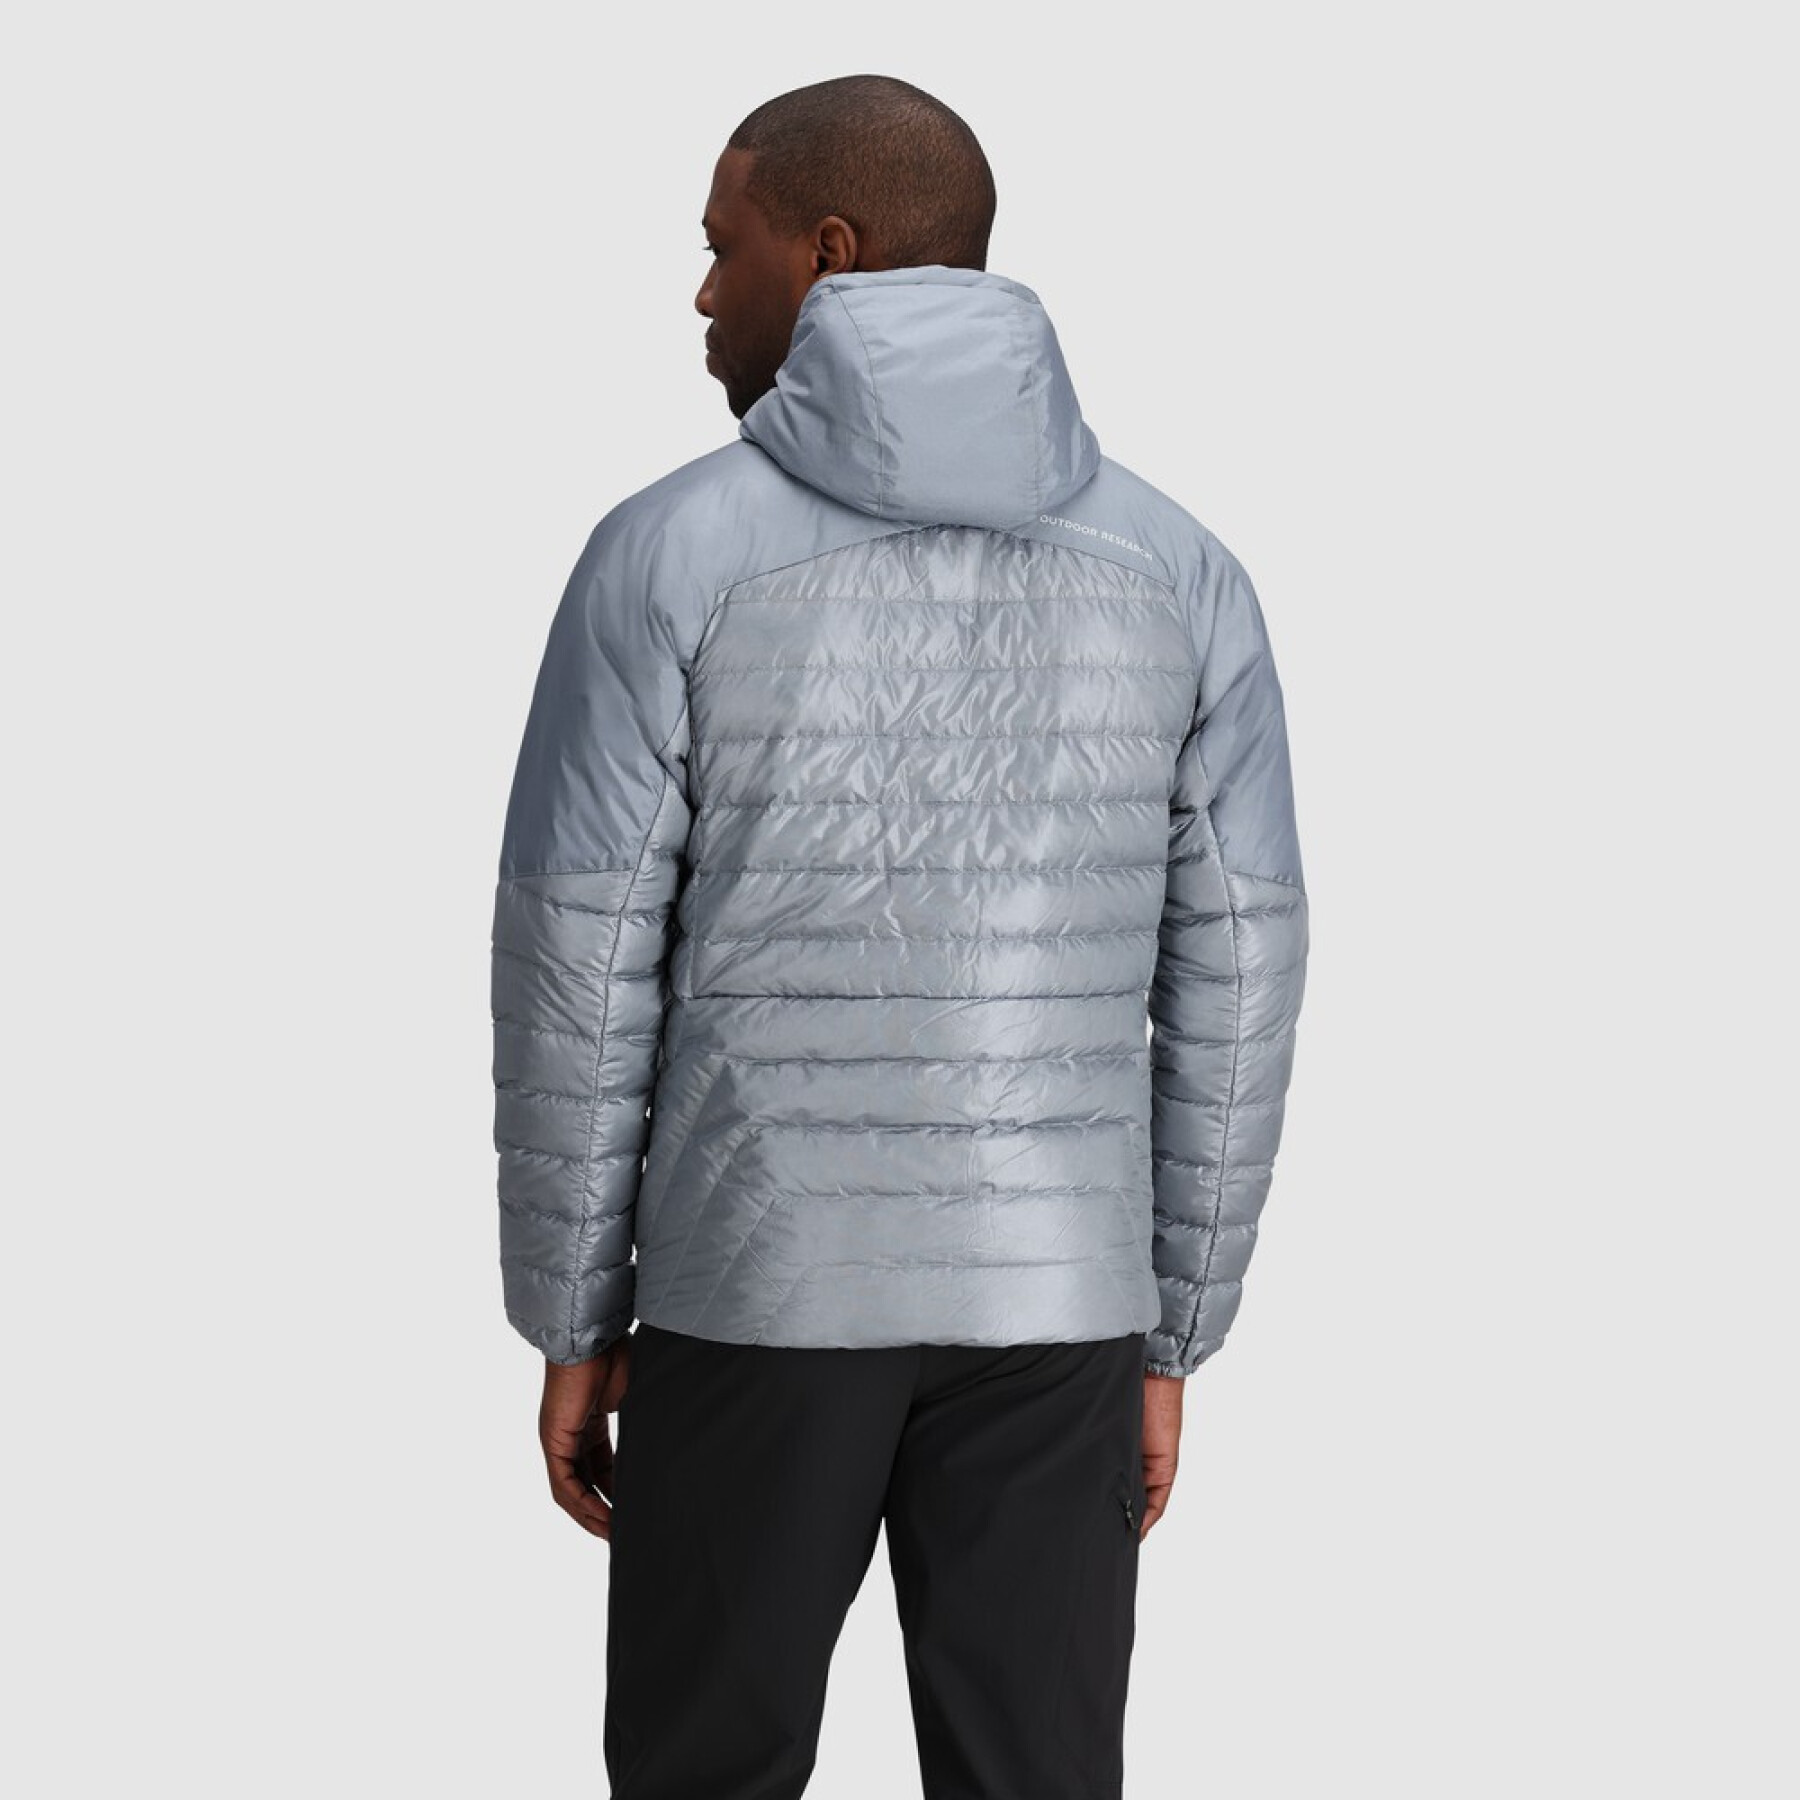 Down jacket Outdoor Research Helium